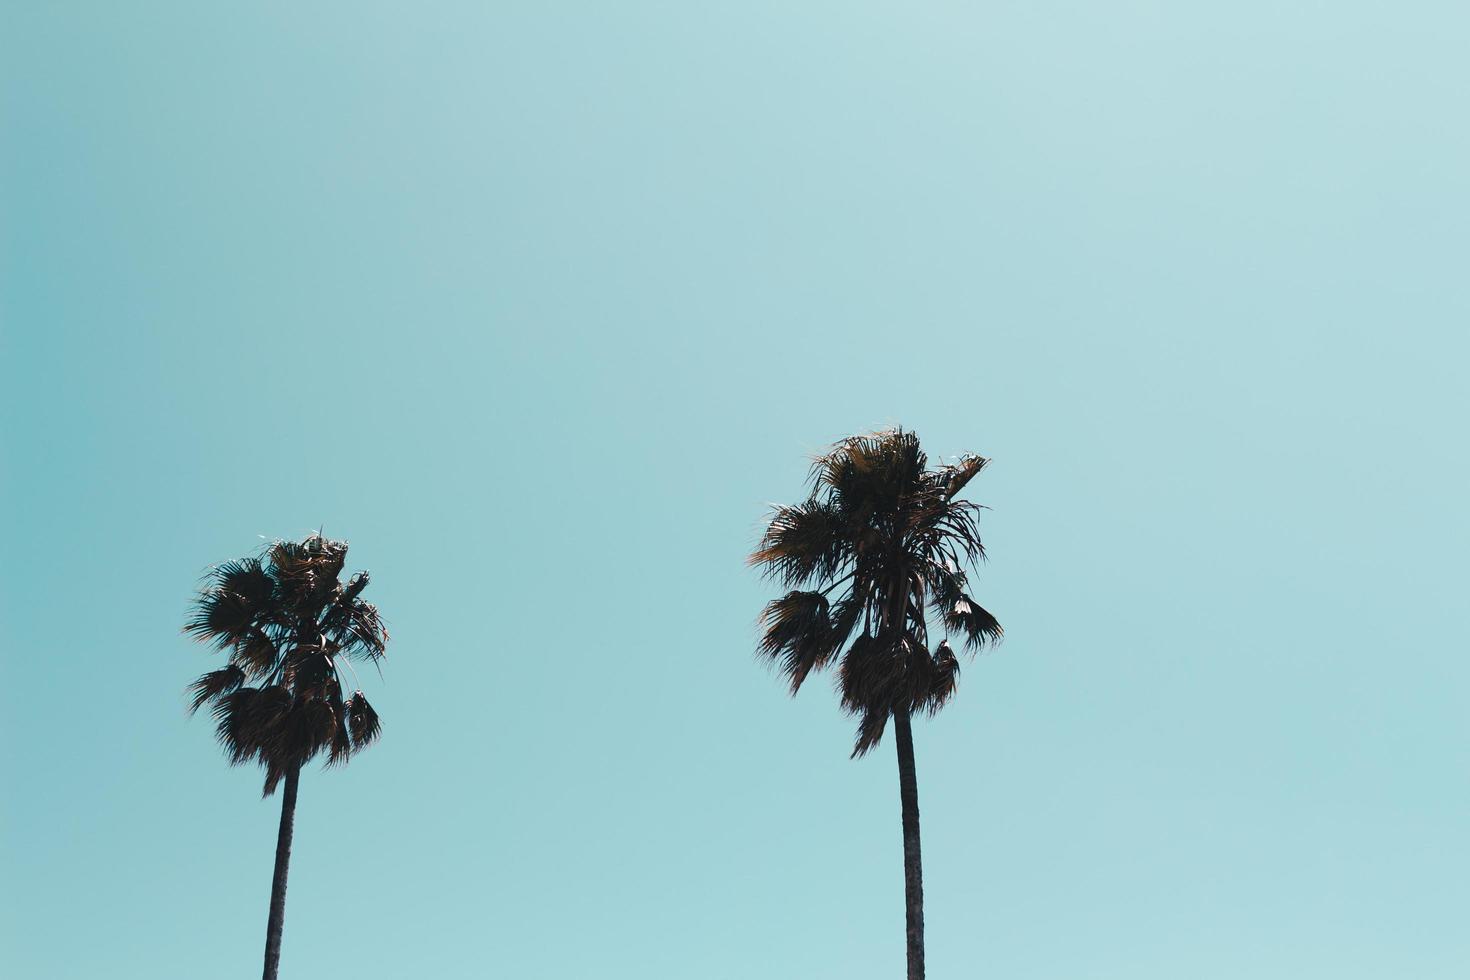 Two palm trees photo